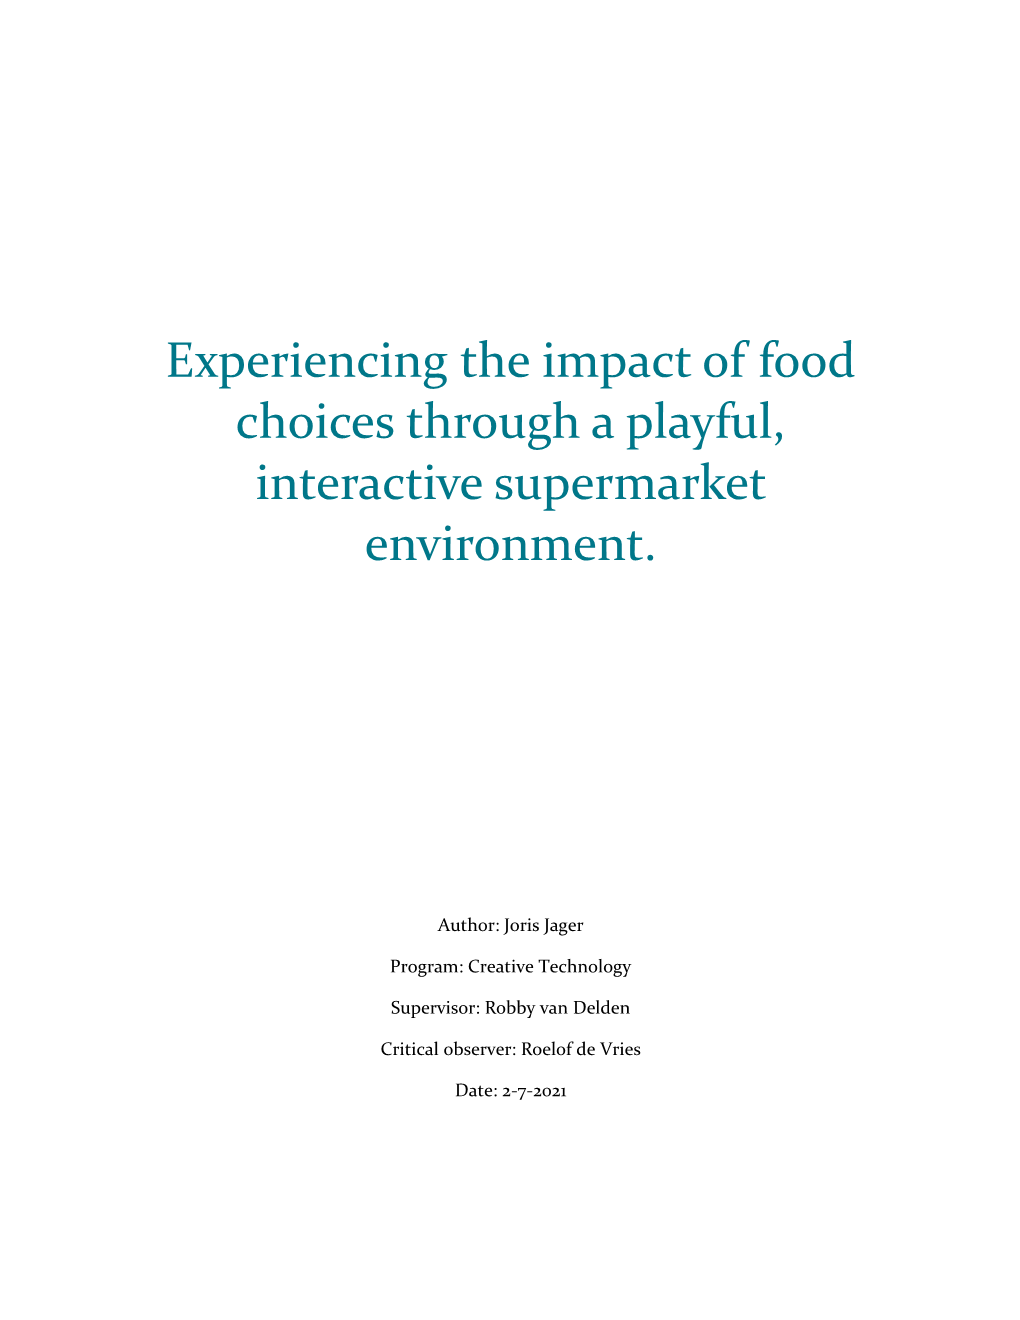 Experiencing the Impact of Food Choices Through a Playful, Interactive Supermarket Environment